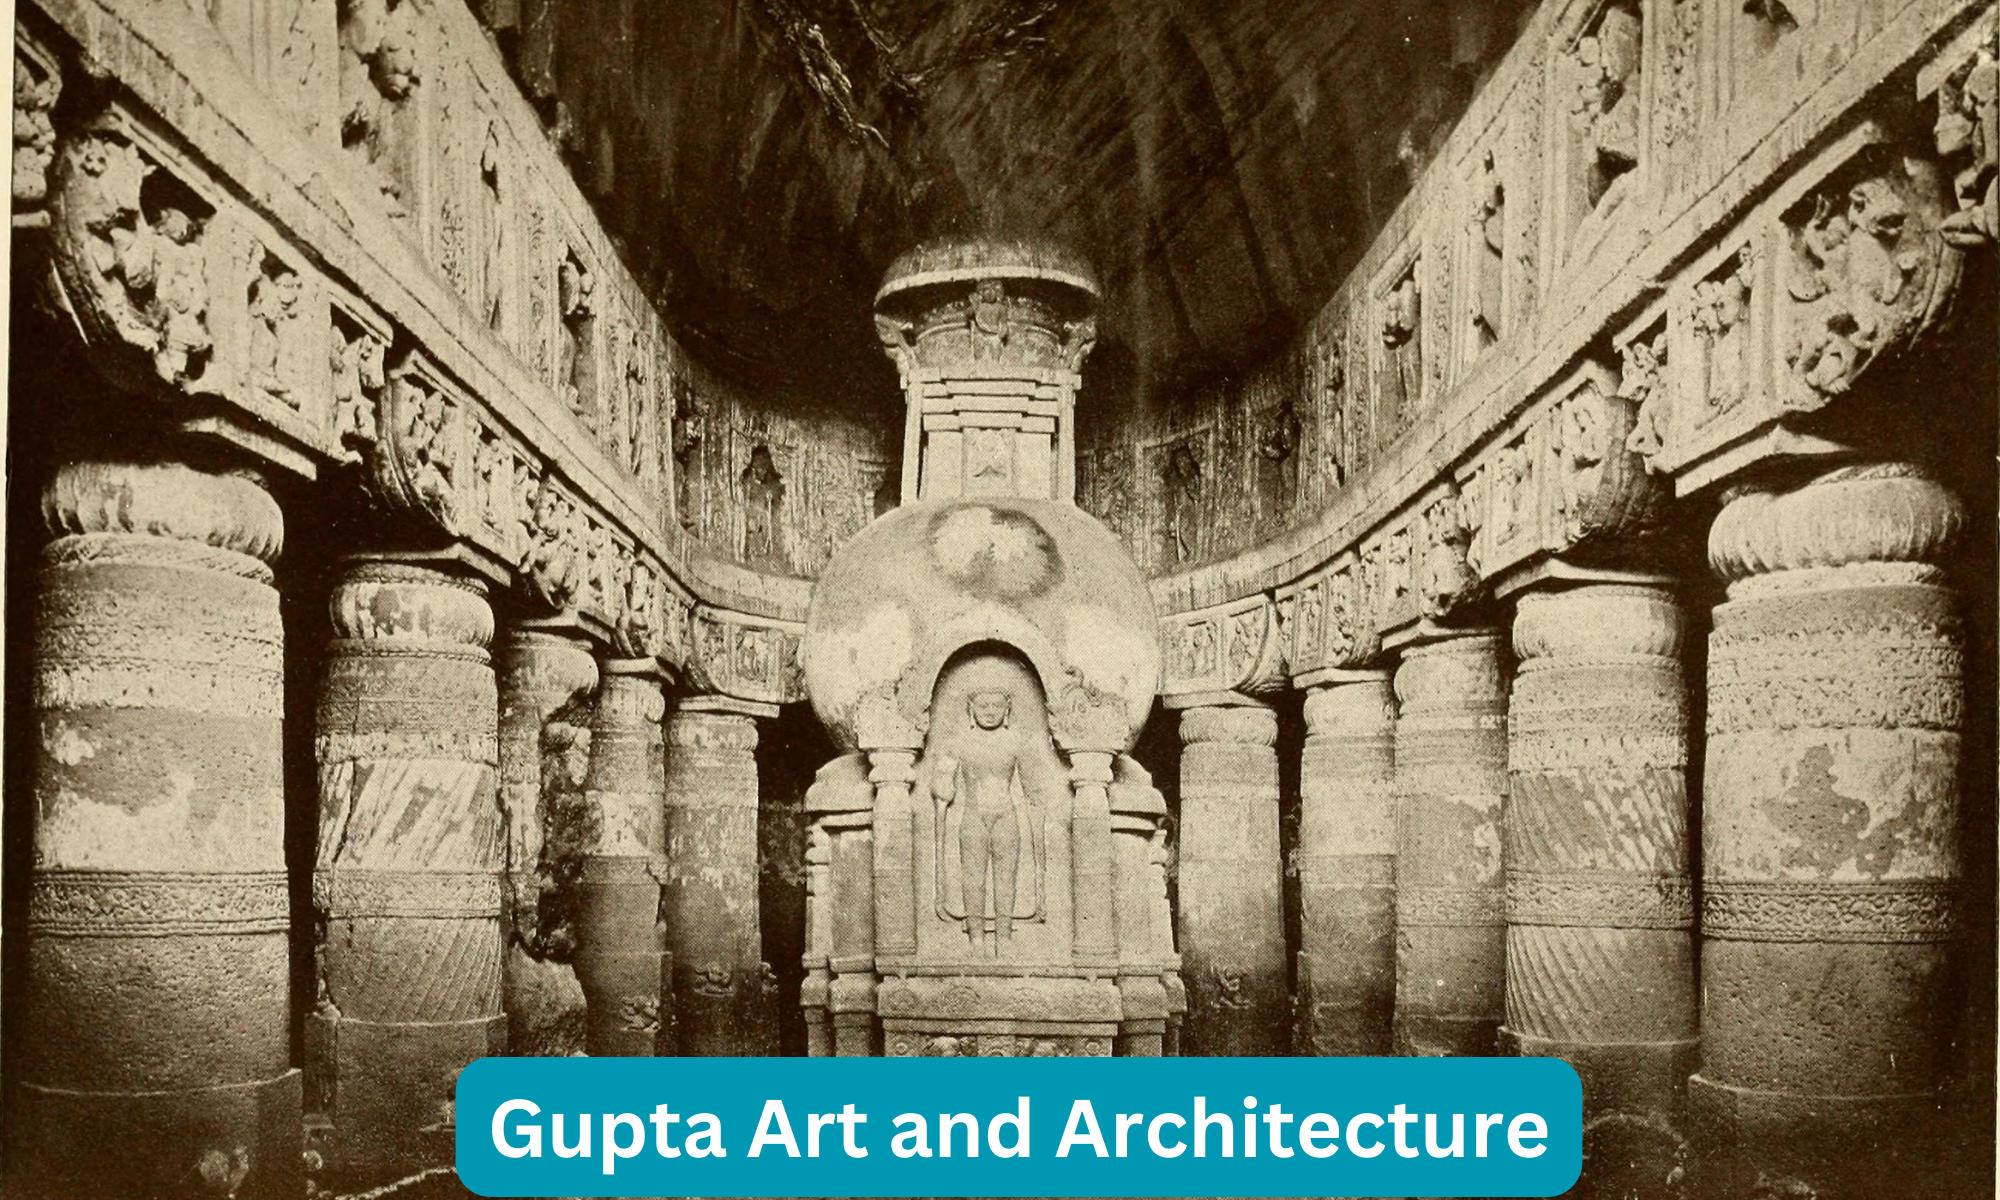 Gupta Empire Art and Architecture: Know About Gupta Art and Architecture_40.1